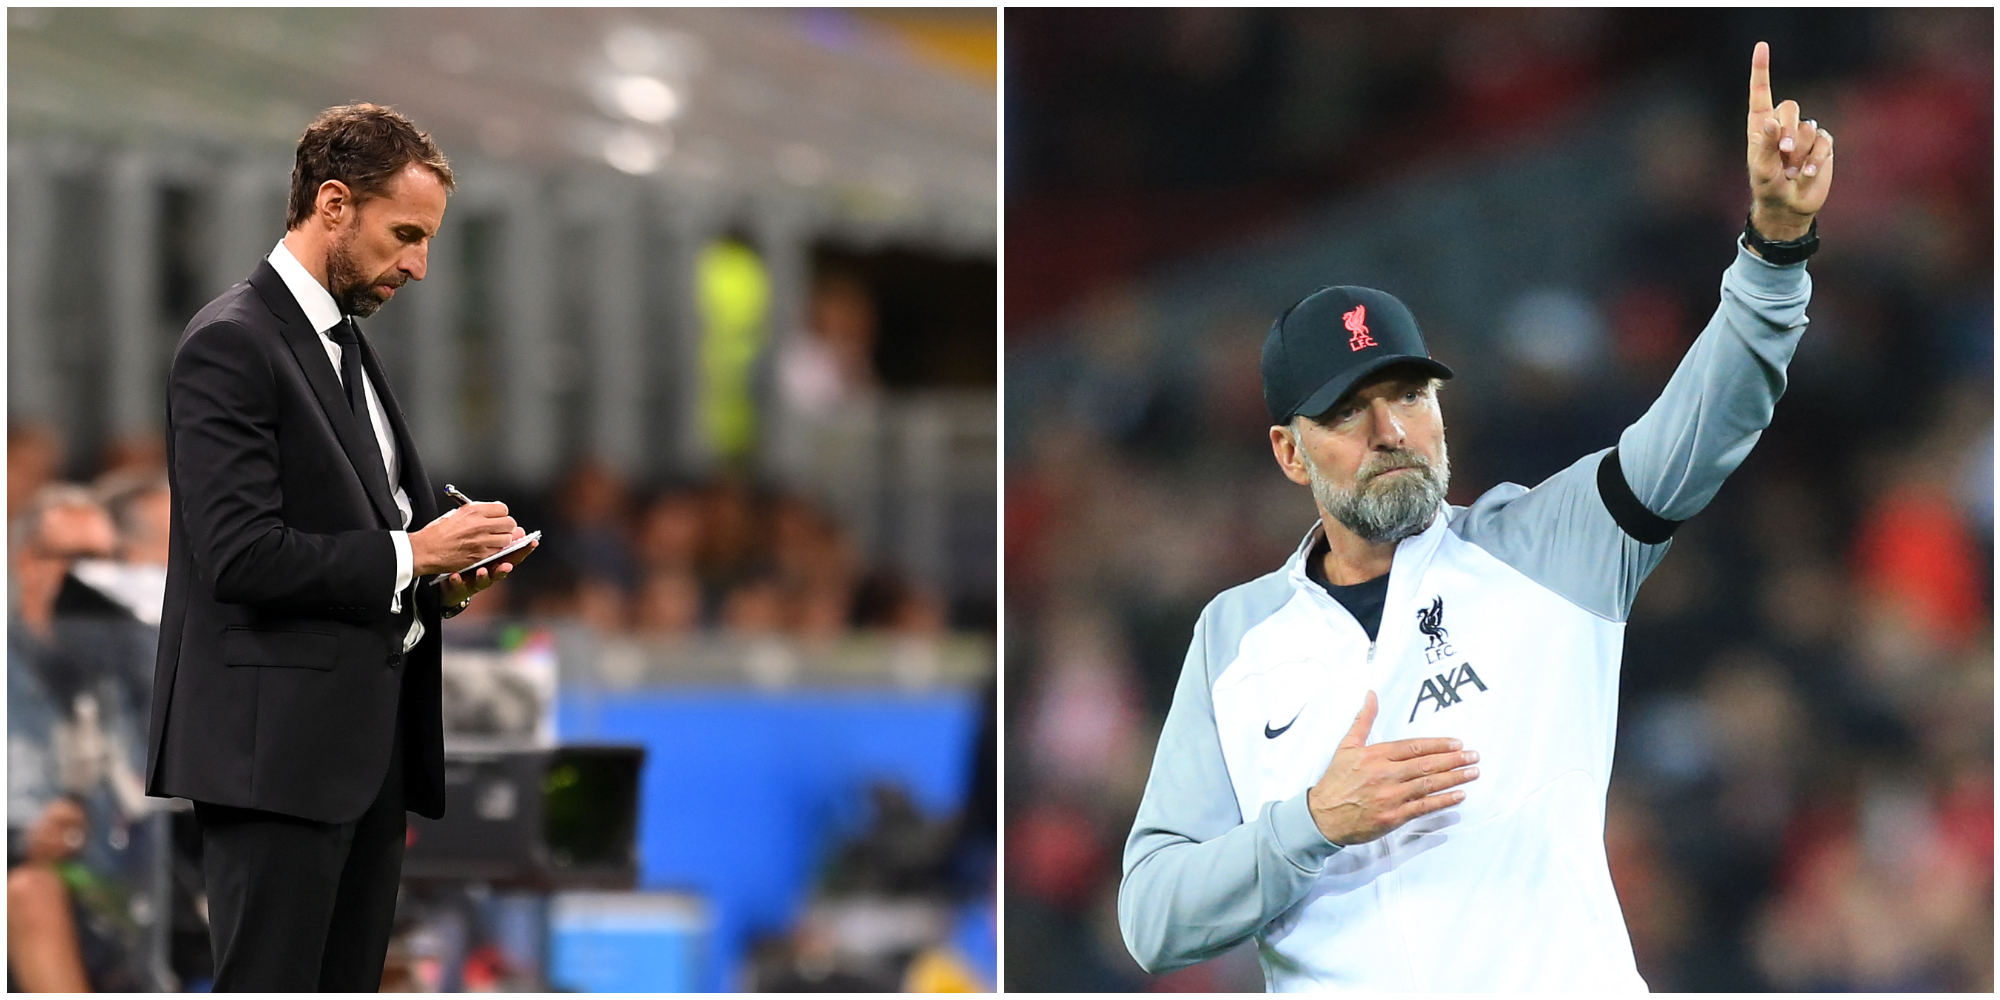 ‘That’s clear’ – Klopp fires subtle dig at Southgate over Trent’s England treatment